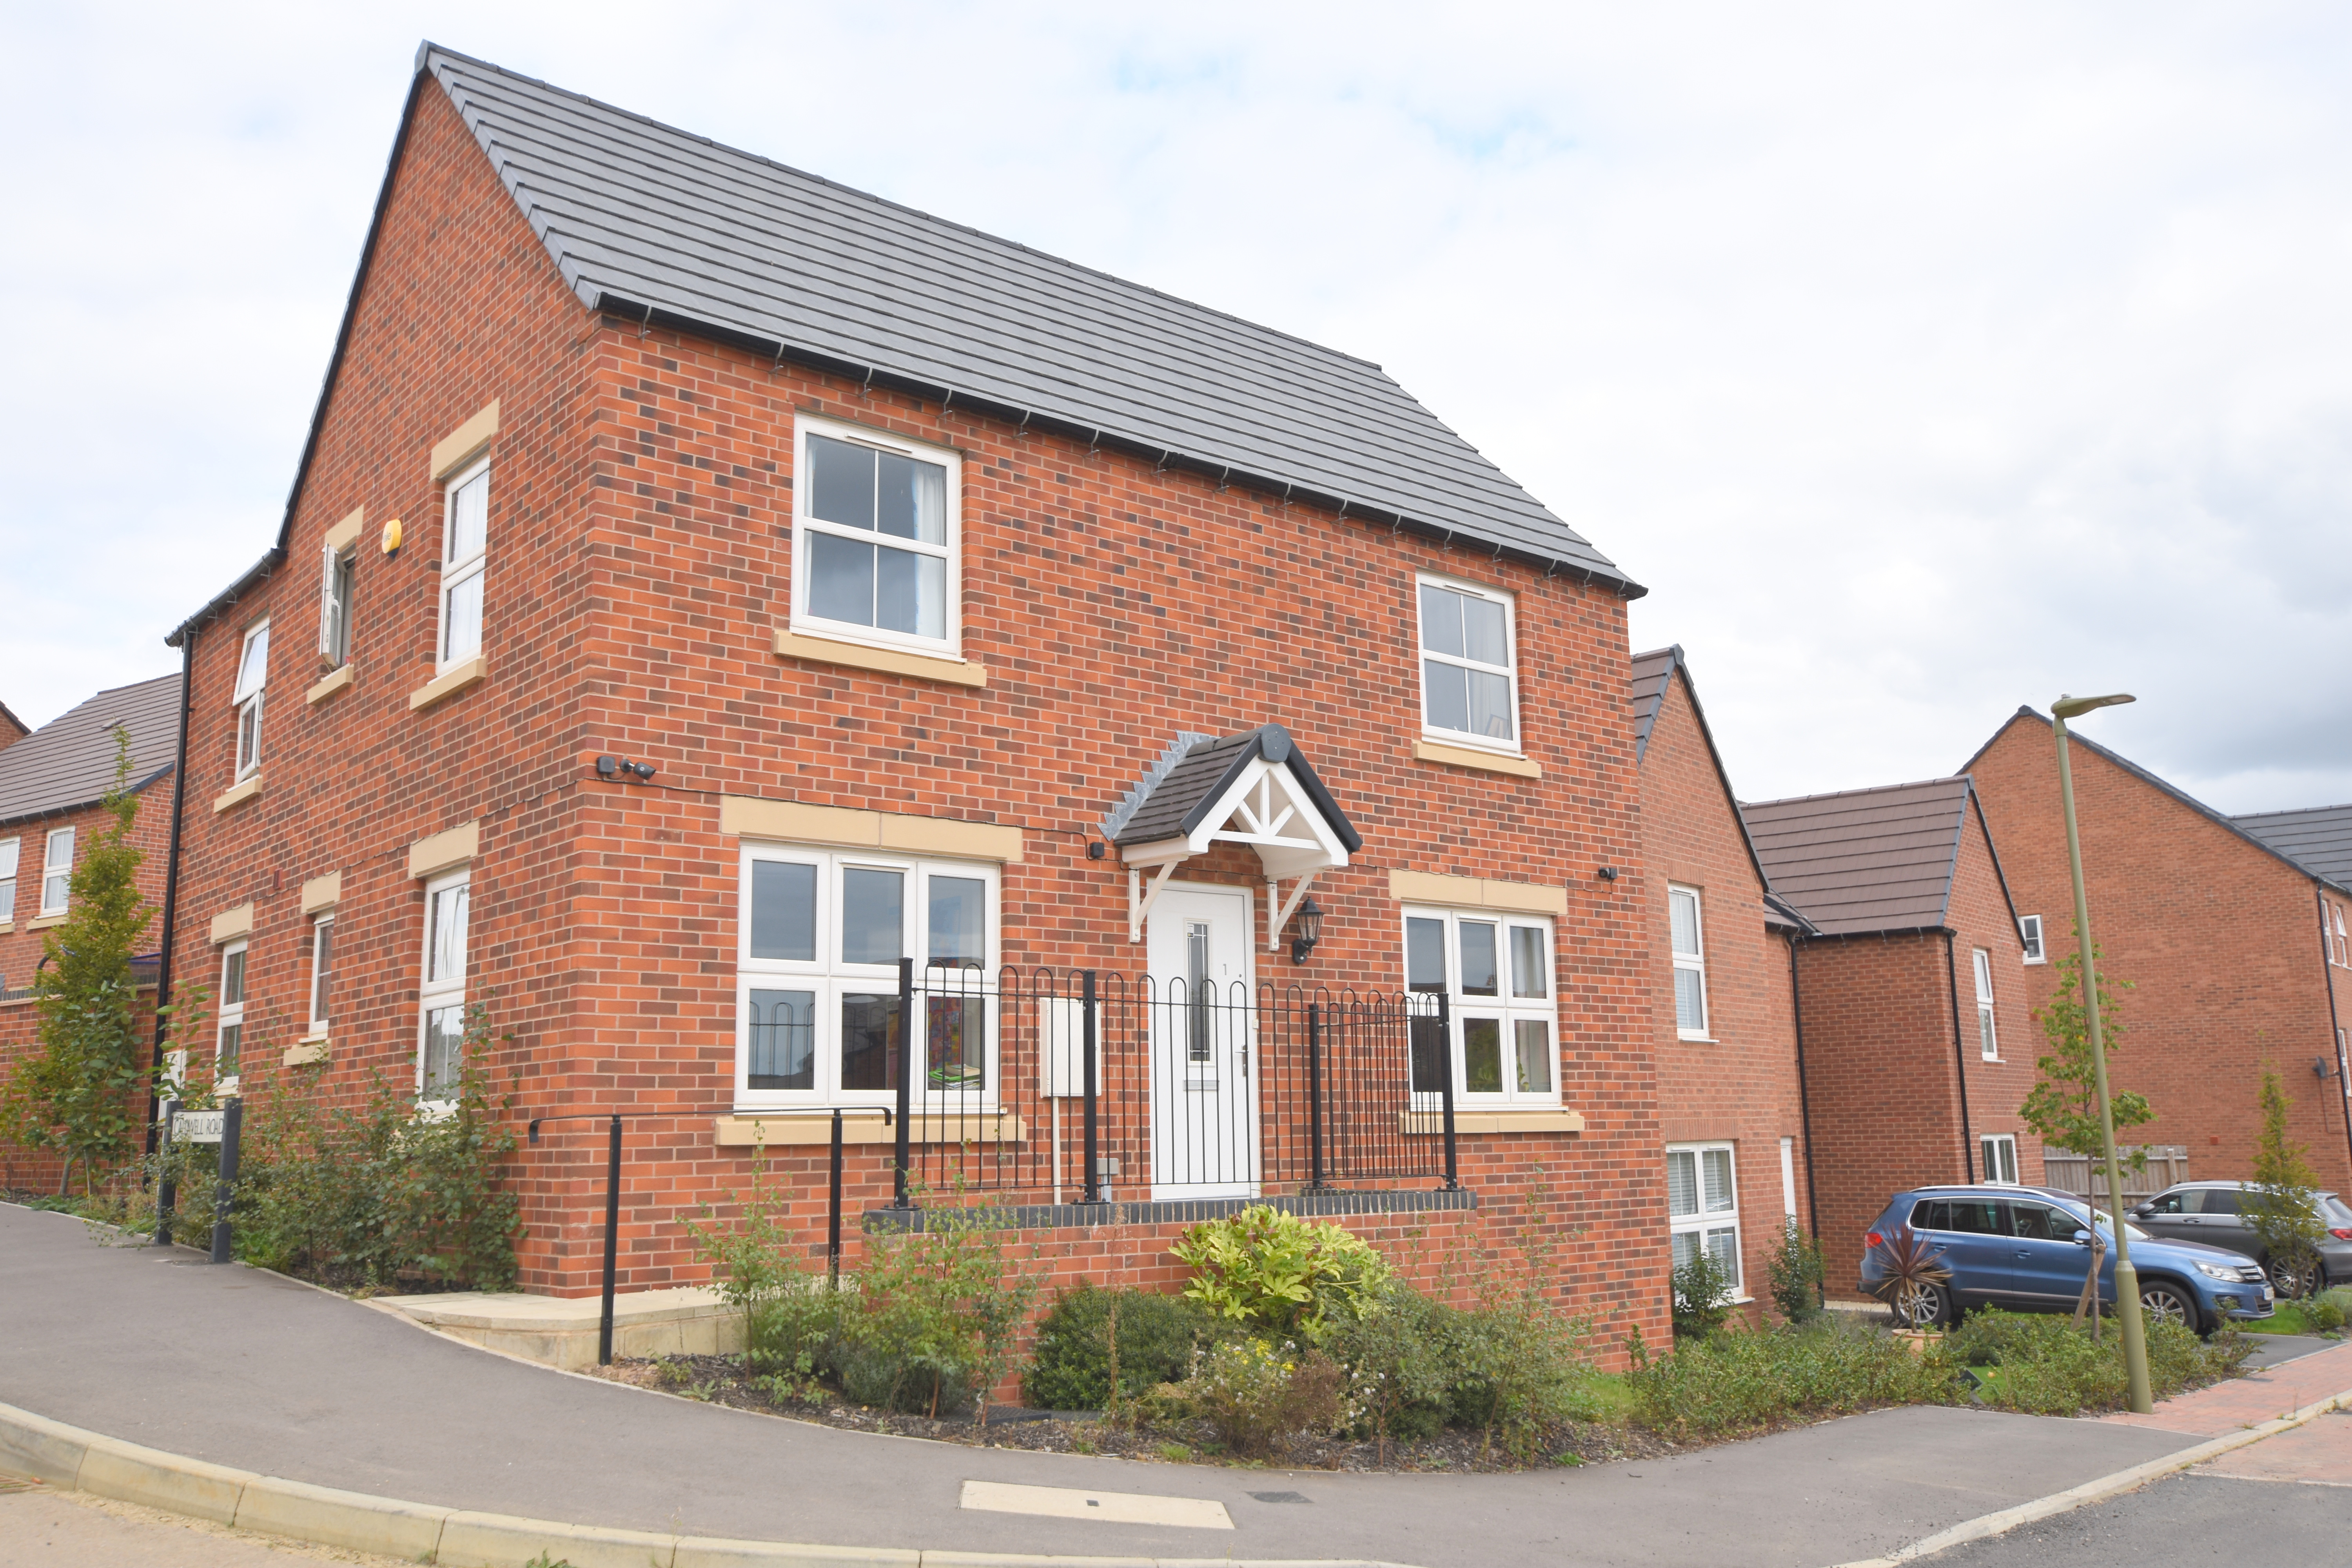 4 bed  for sale in Hearn Drive, Banbury 0